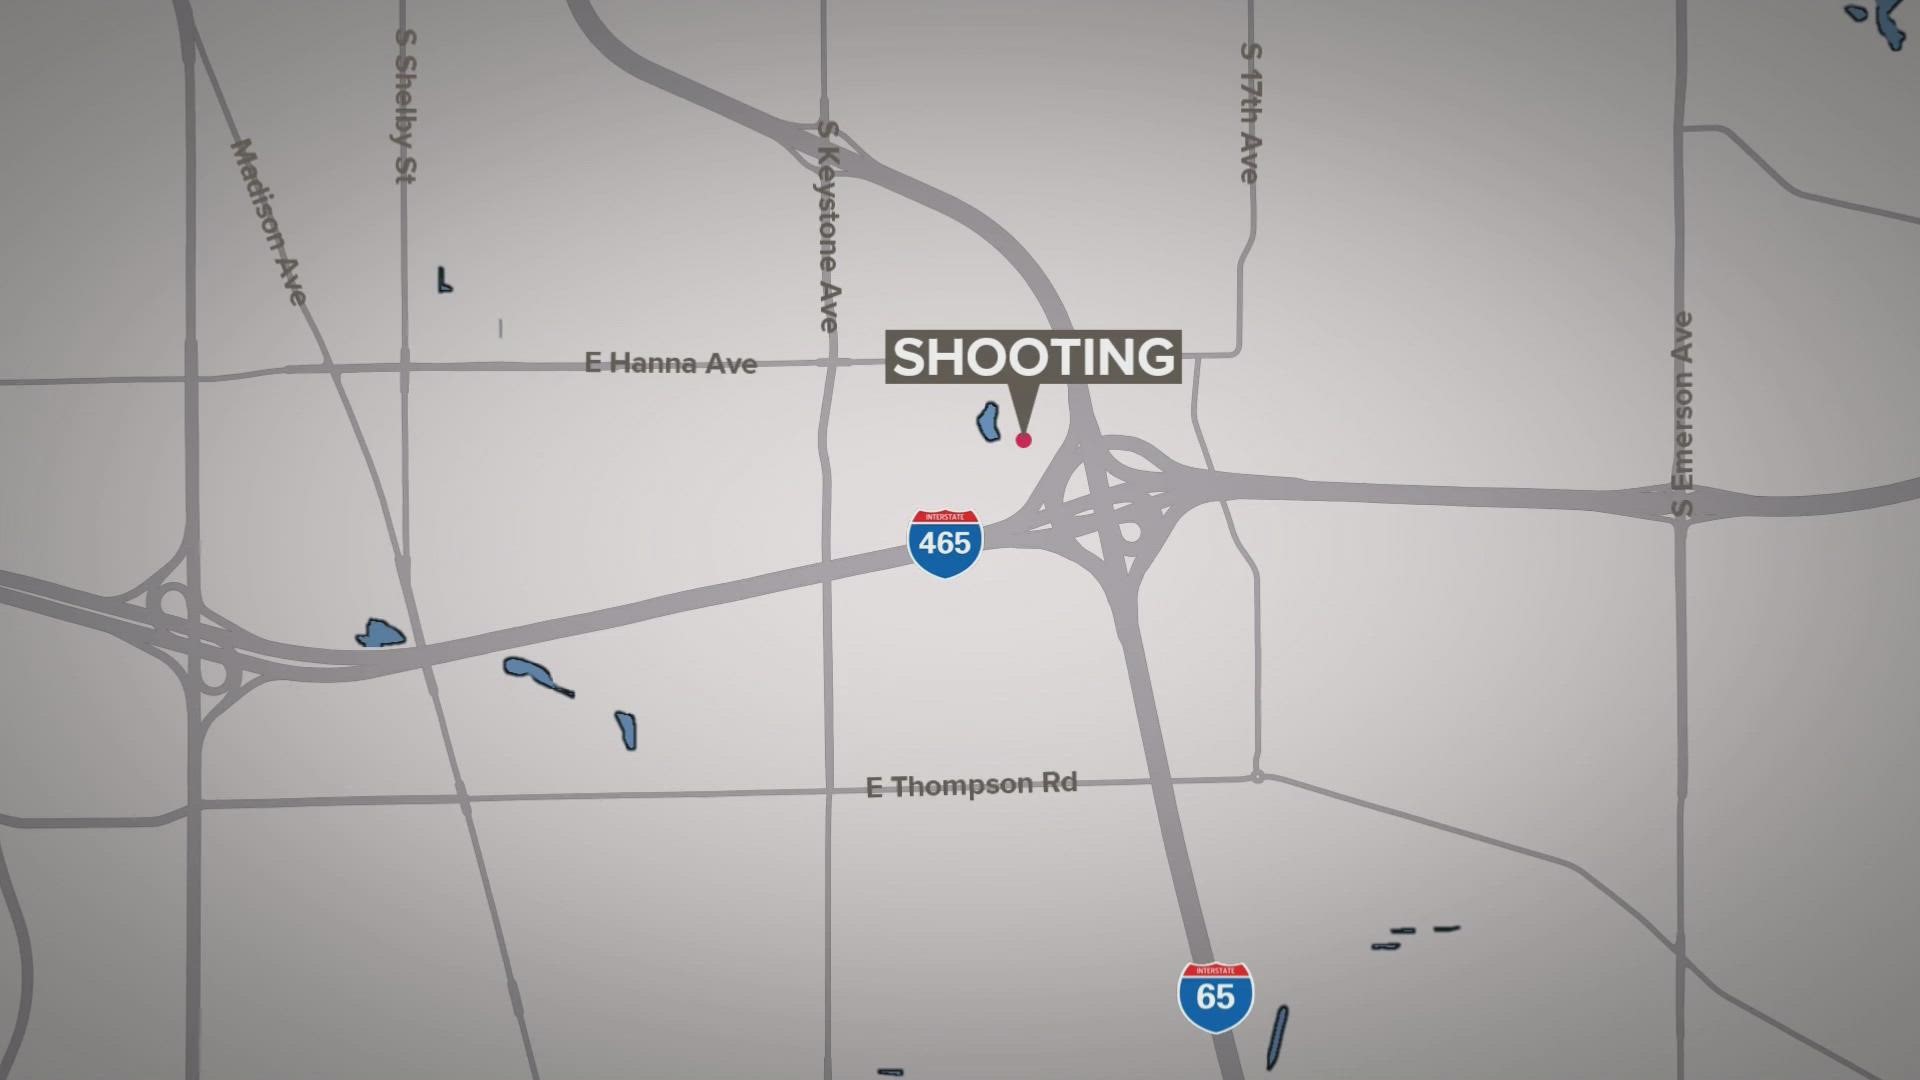 The 18-year-old was found shot in the Stone Lakes apartment complex off I-65 and I-465 around 1:30 a.m. Sunday and died at the hospital.